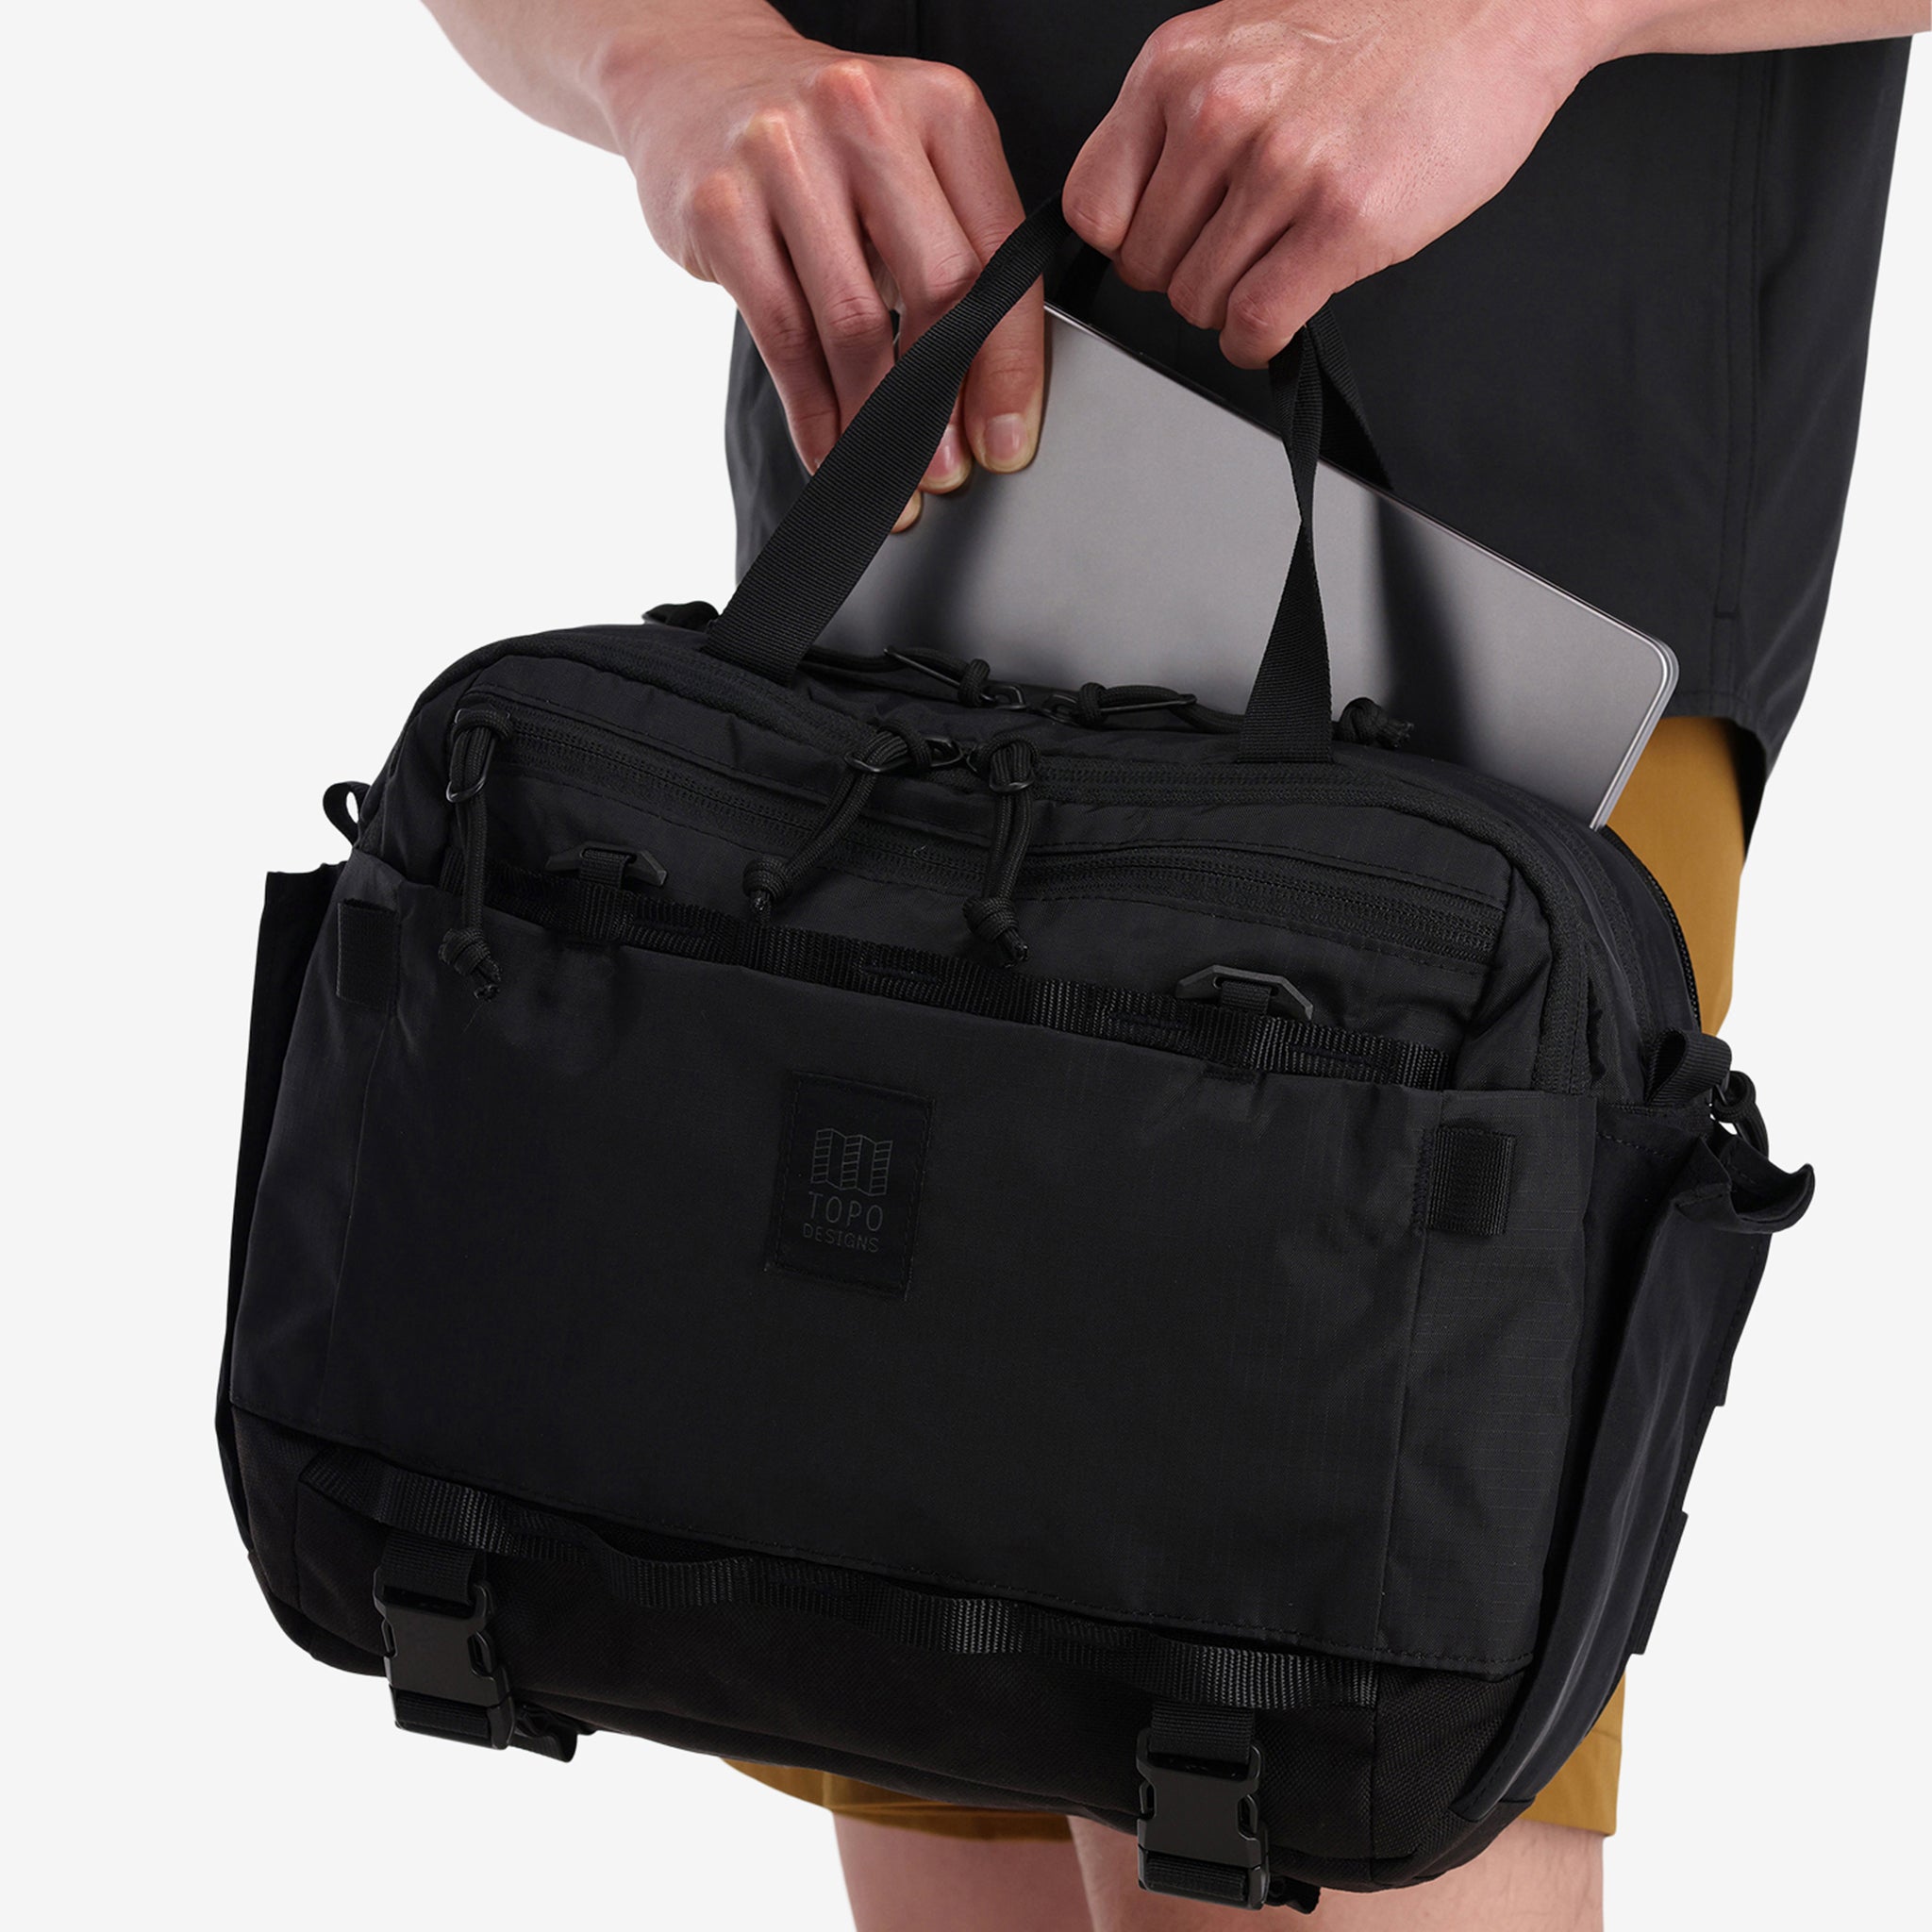 Laptop sleeve view of Topo Designs Mountain Cross Bag in recycled "Black" nylon.